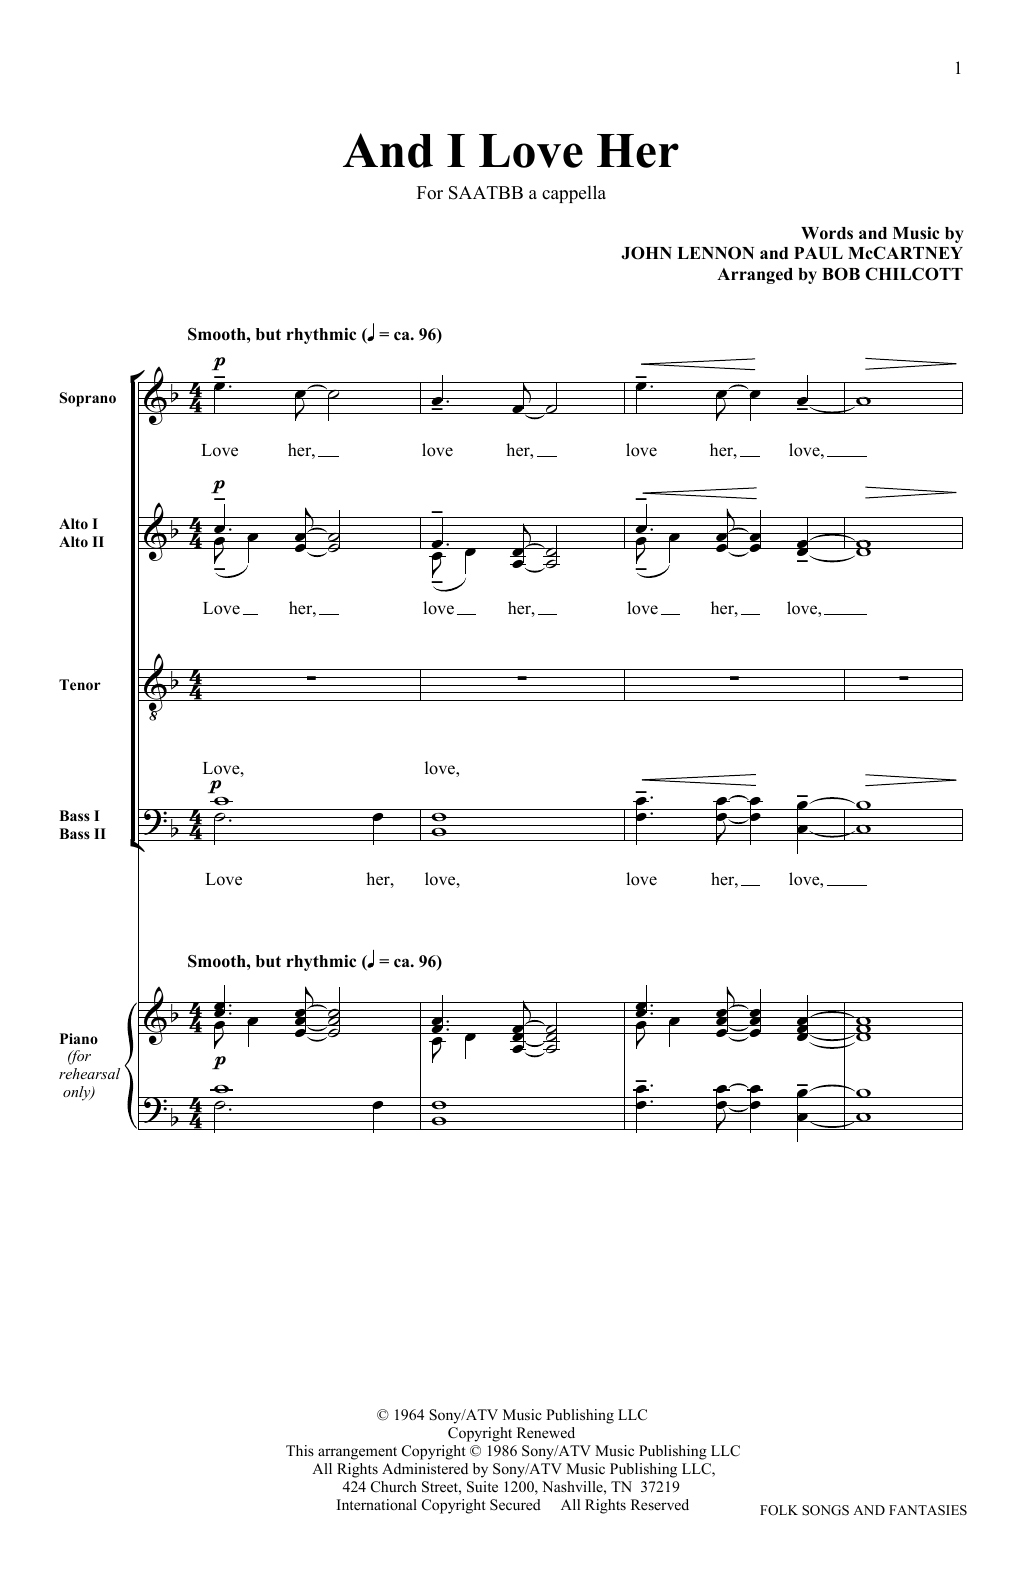 Download The King's Singers And I Love Her Sheet Music